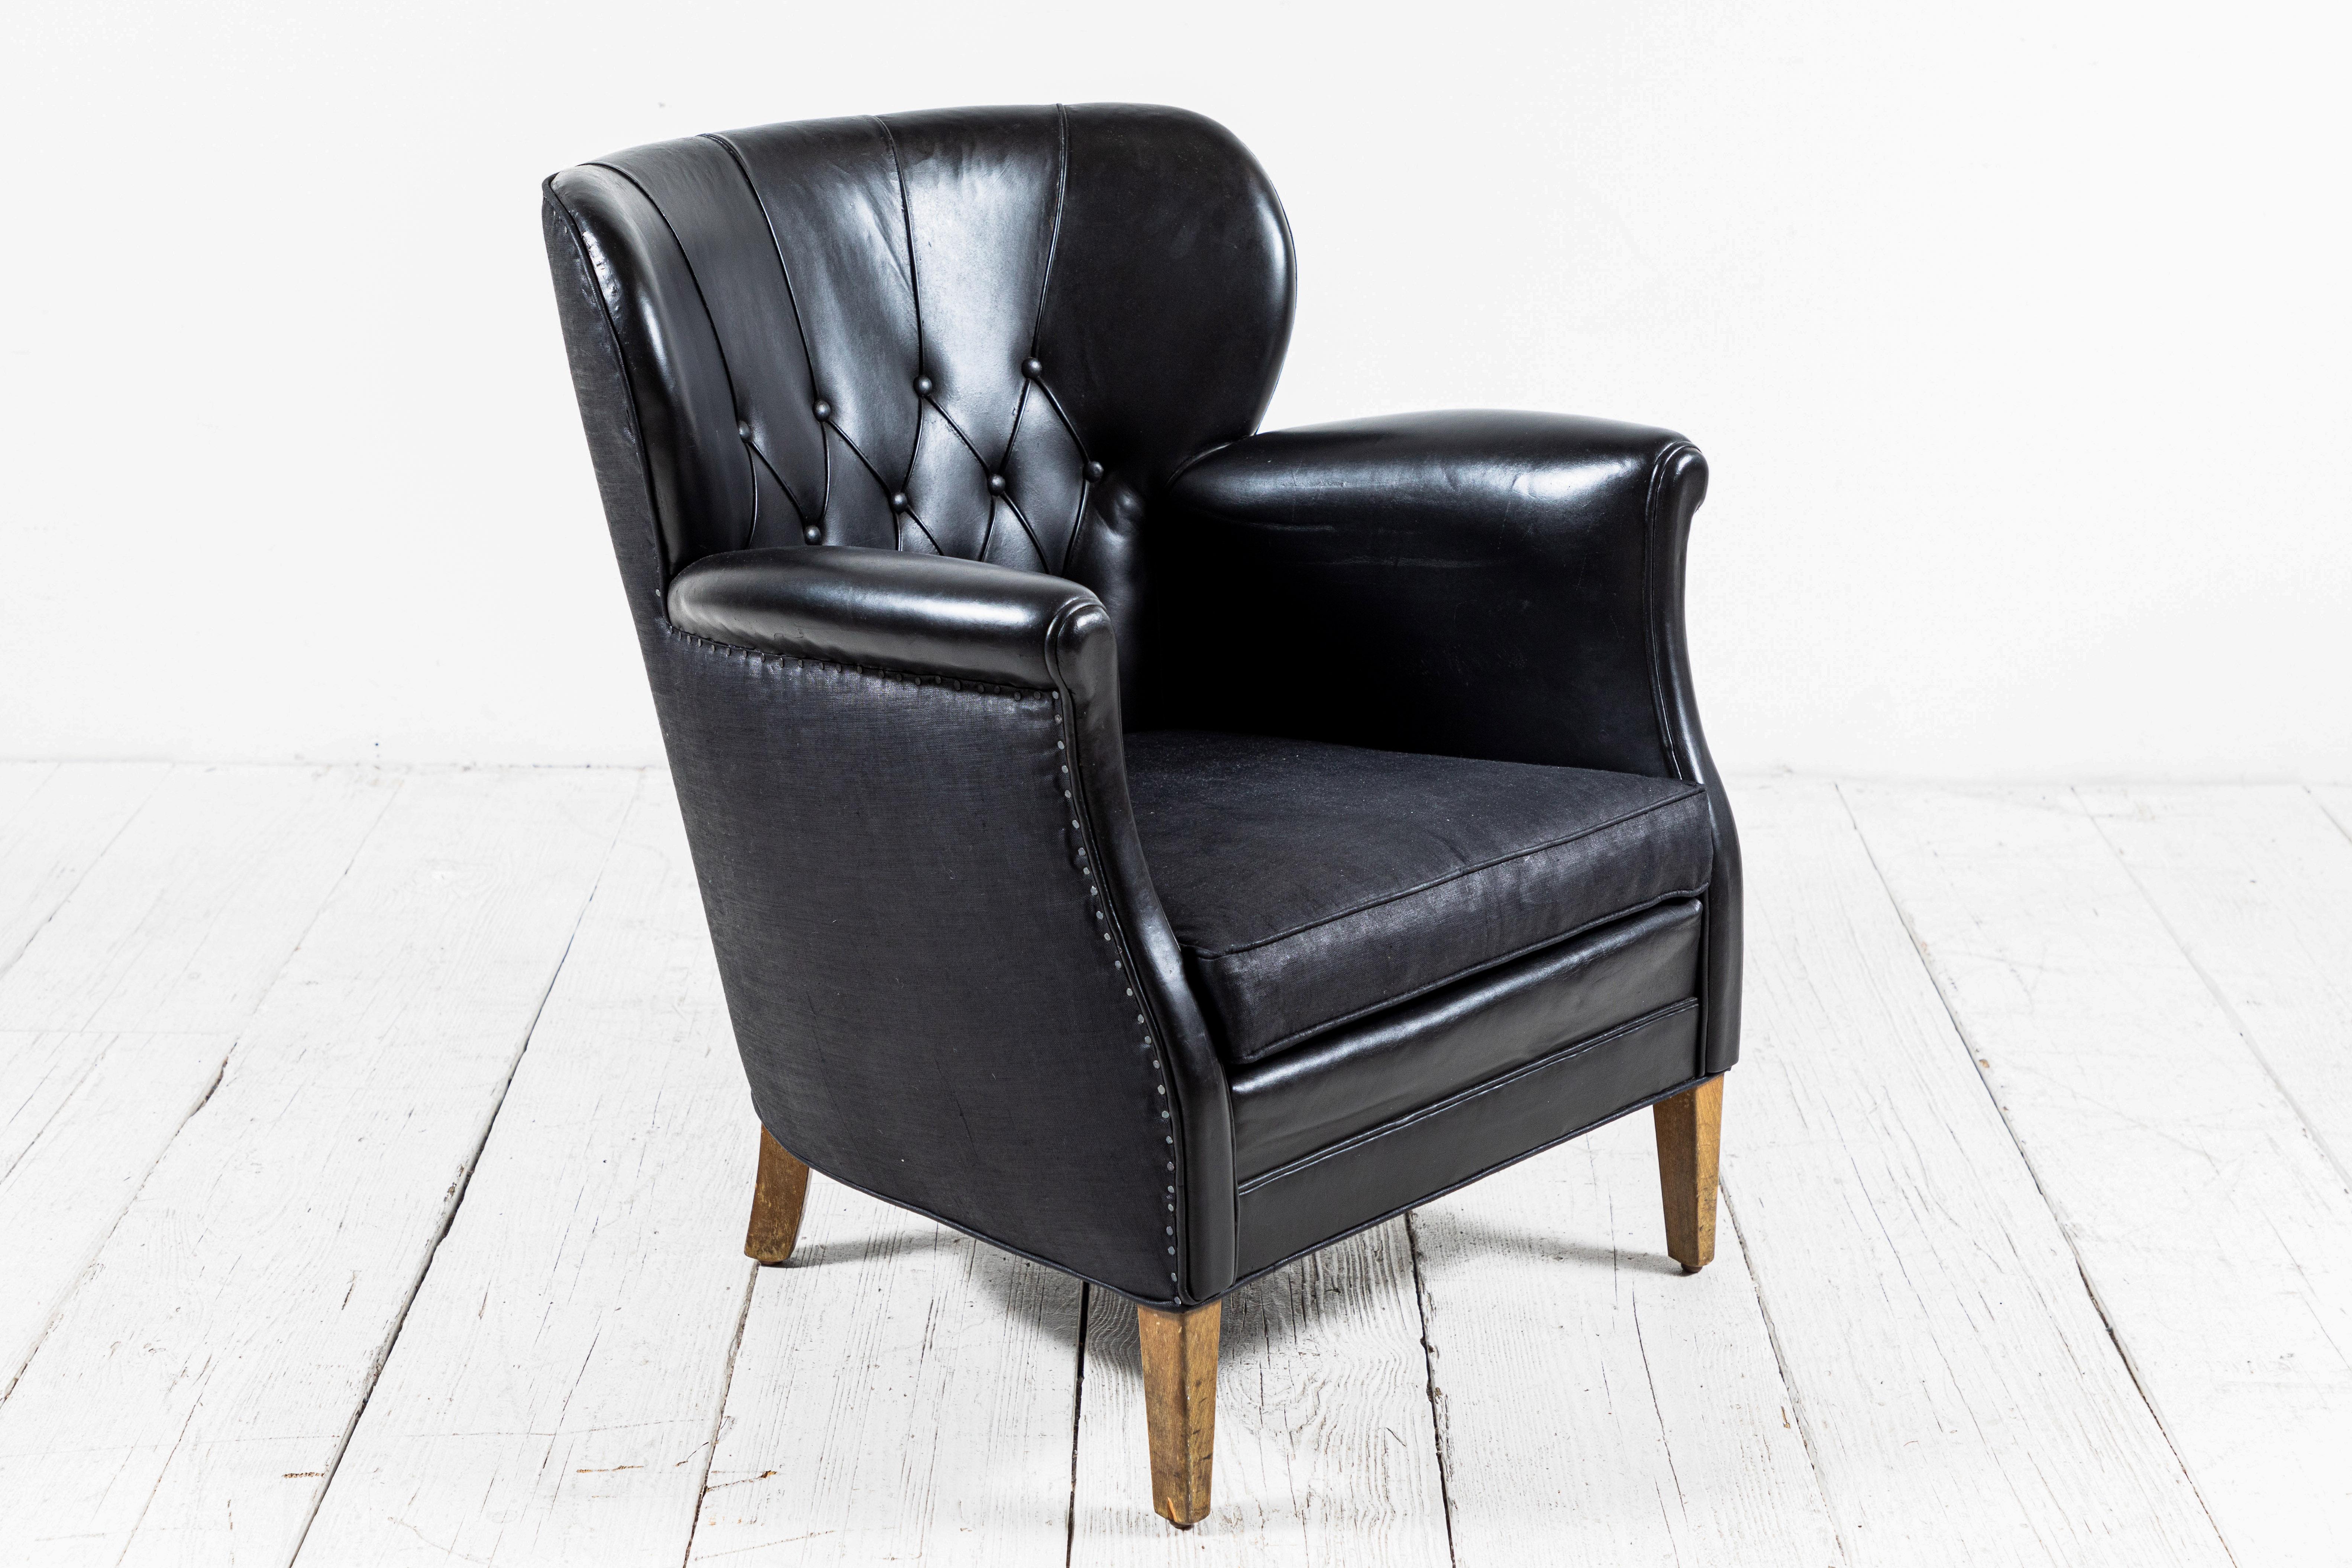 Danish style black leather tufted pair of chairs with slight winged sides. Black beetled linen and been added to the back of the chairs and seat cushions.